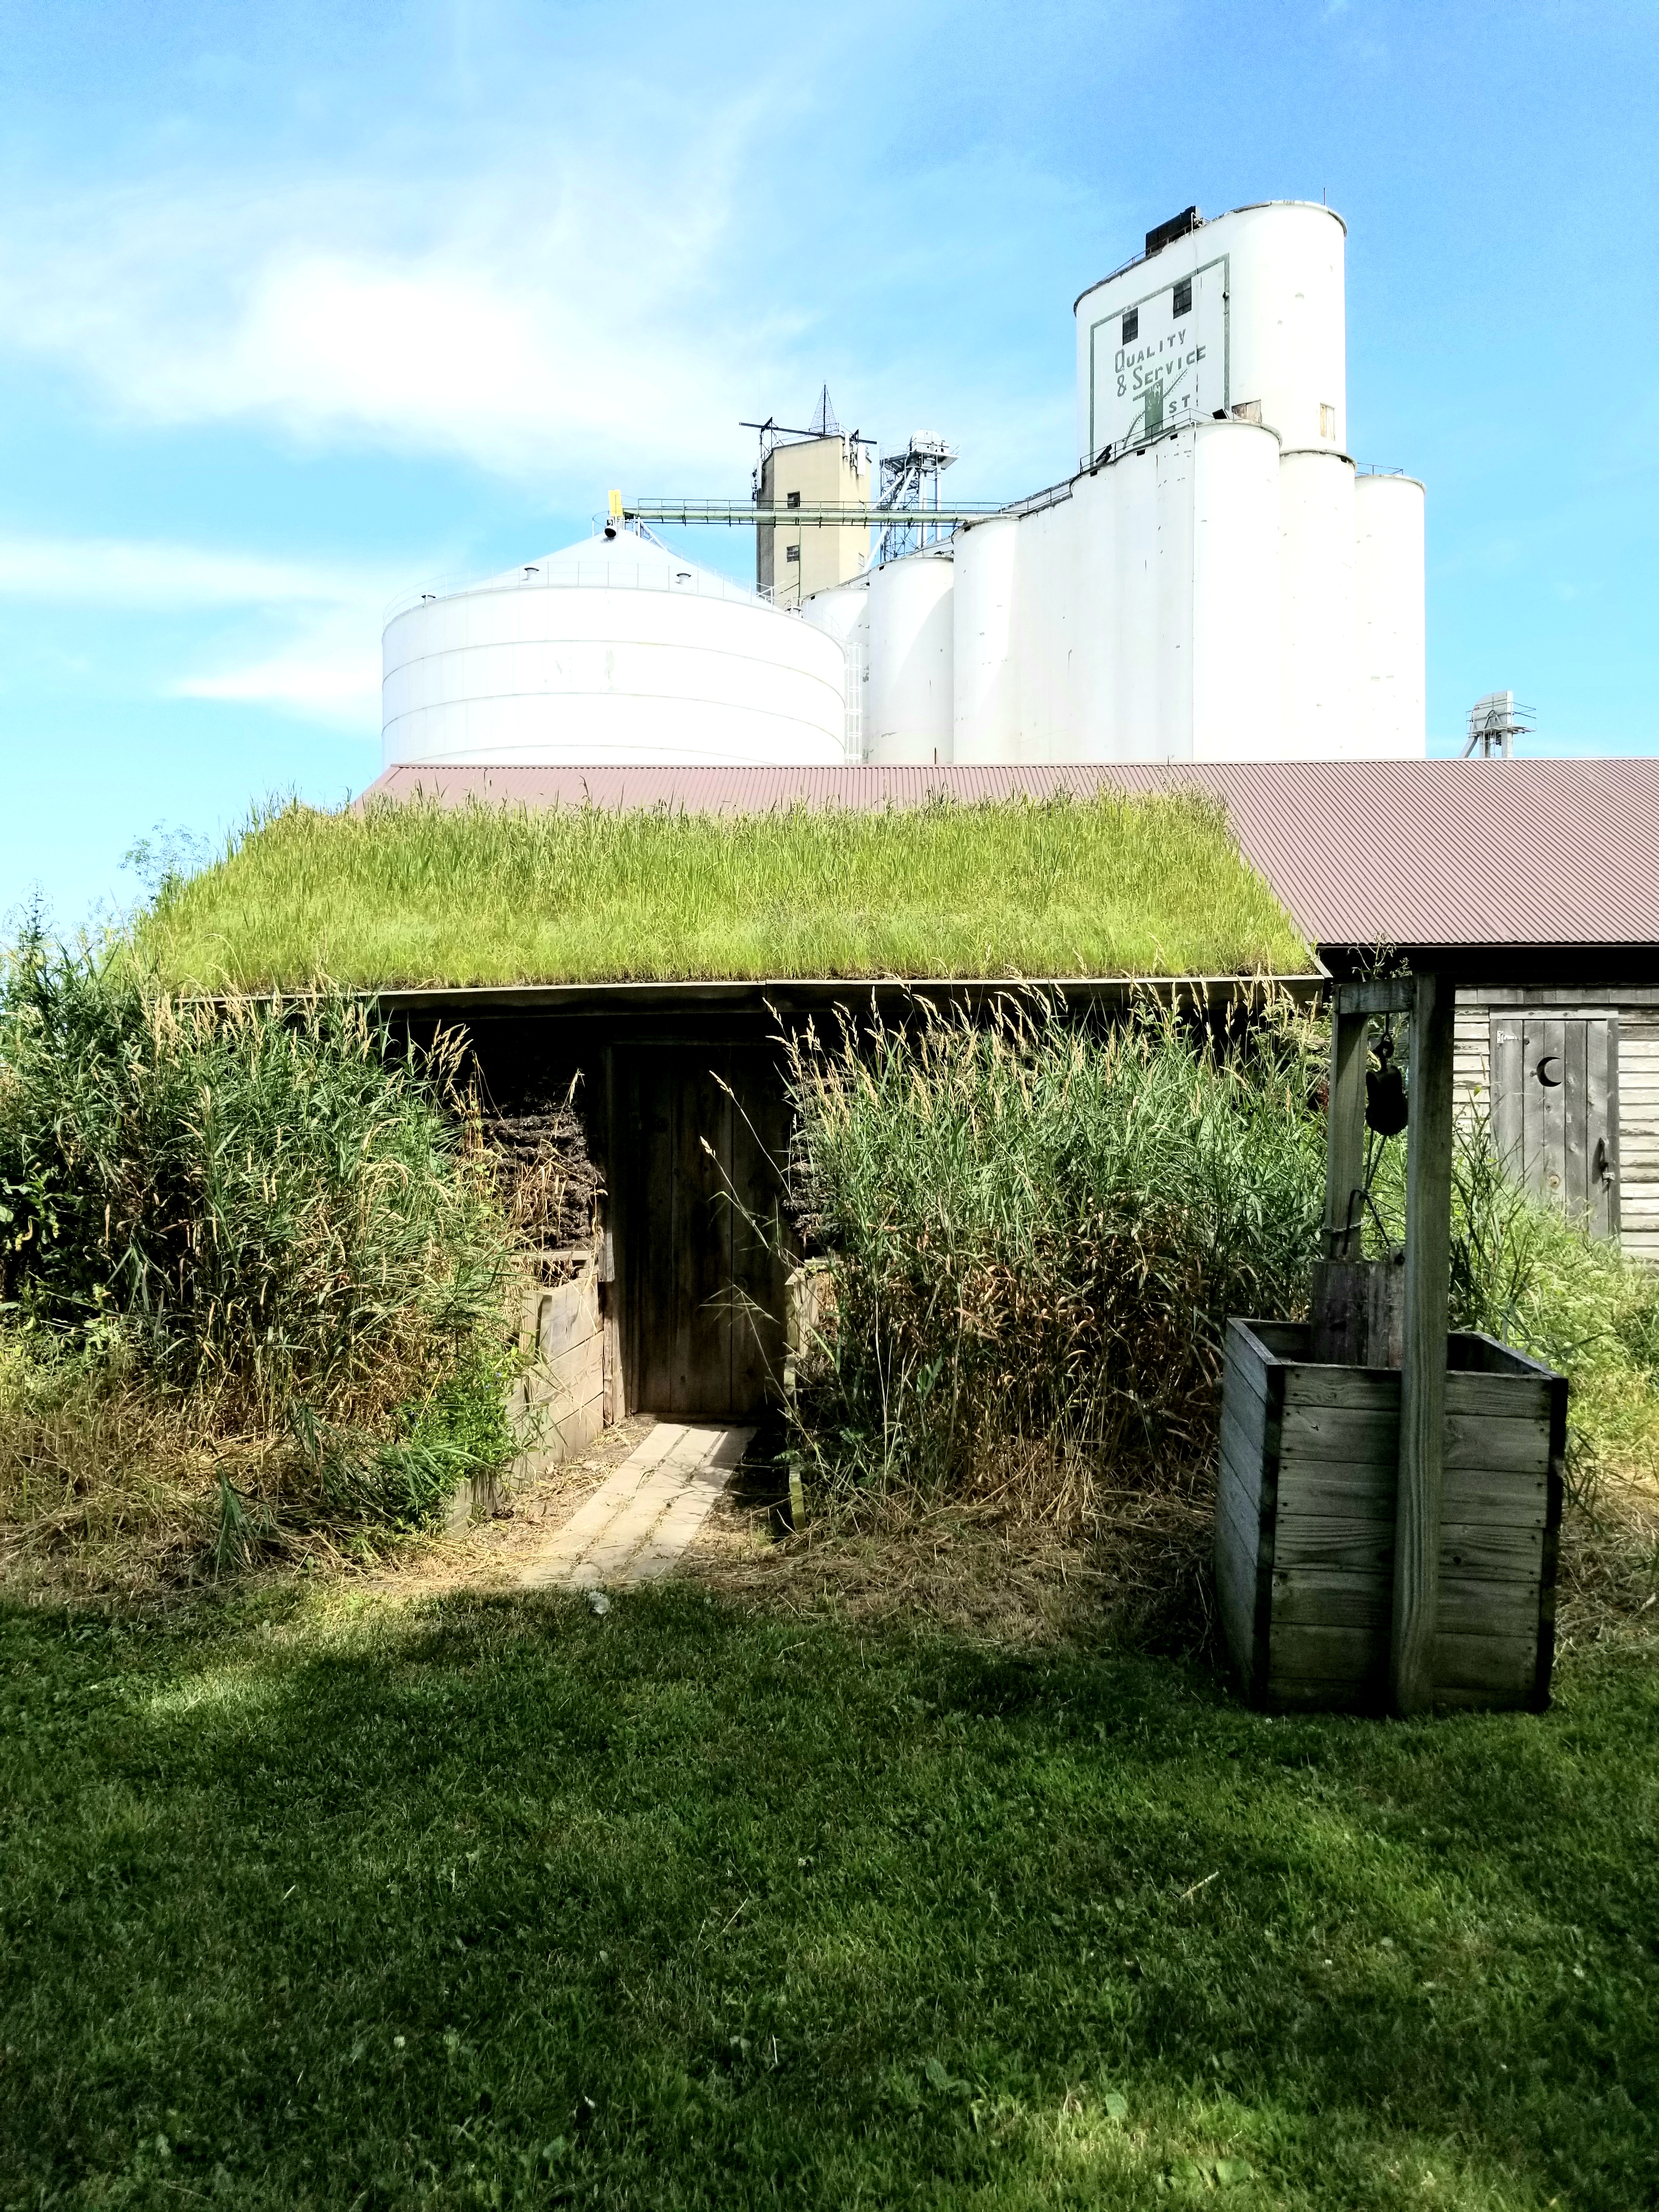 West Bend Sod House